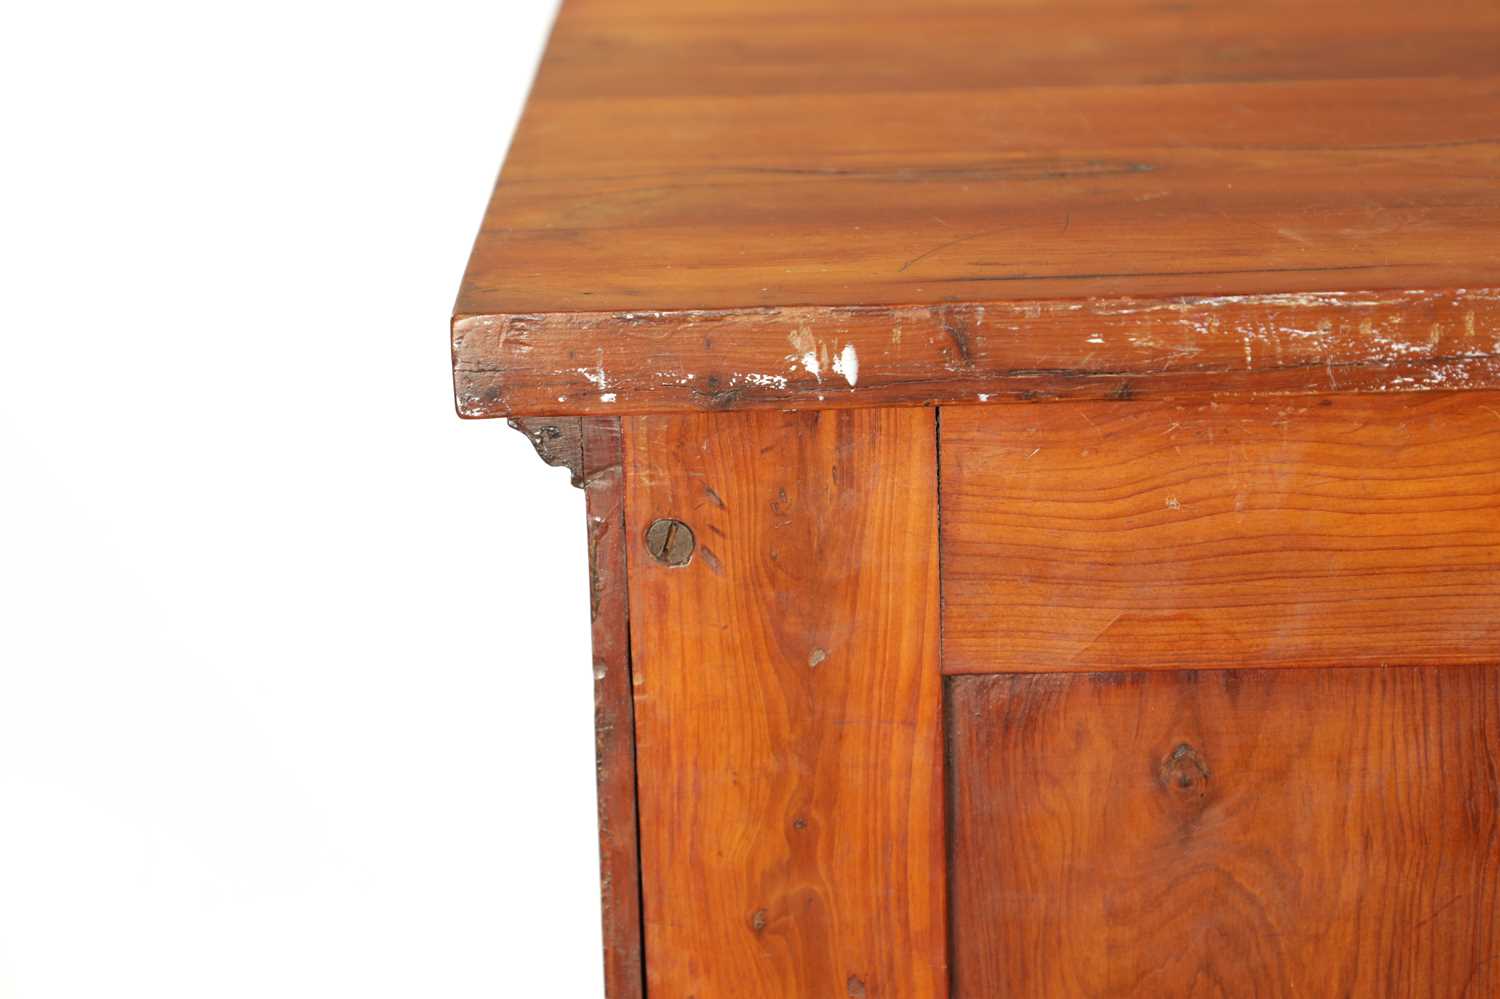 AN 18TH CENTURY EMPIRE STYLE YEW-WOOD BEDSIDE CABINET - Image 8 of 9